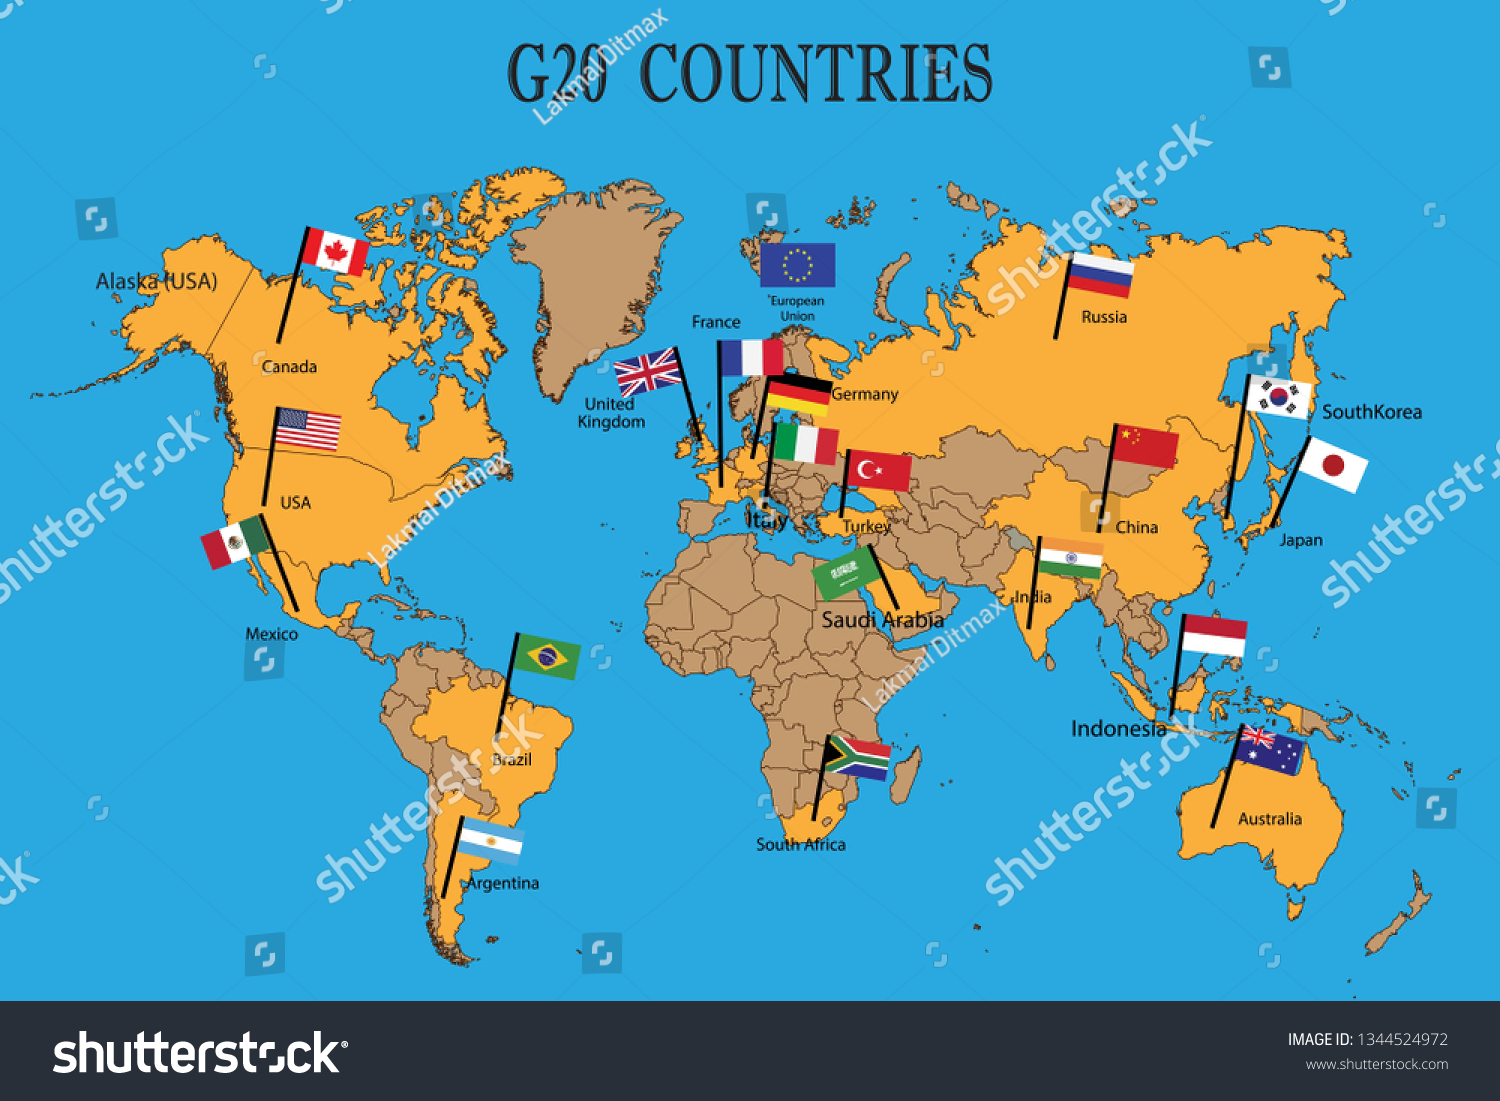 World Map G20 Countries Flags Stock Vector Royalty Free 1344524972 Shutterstock 1625